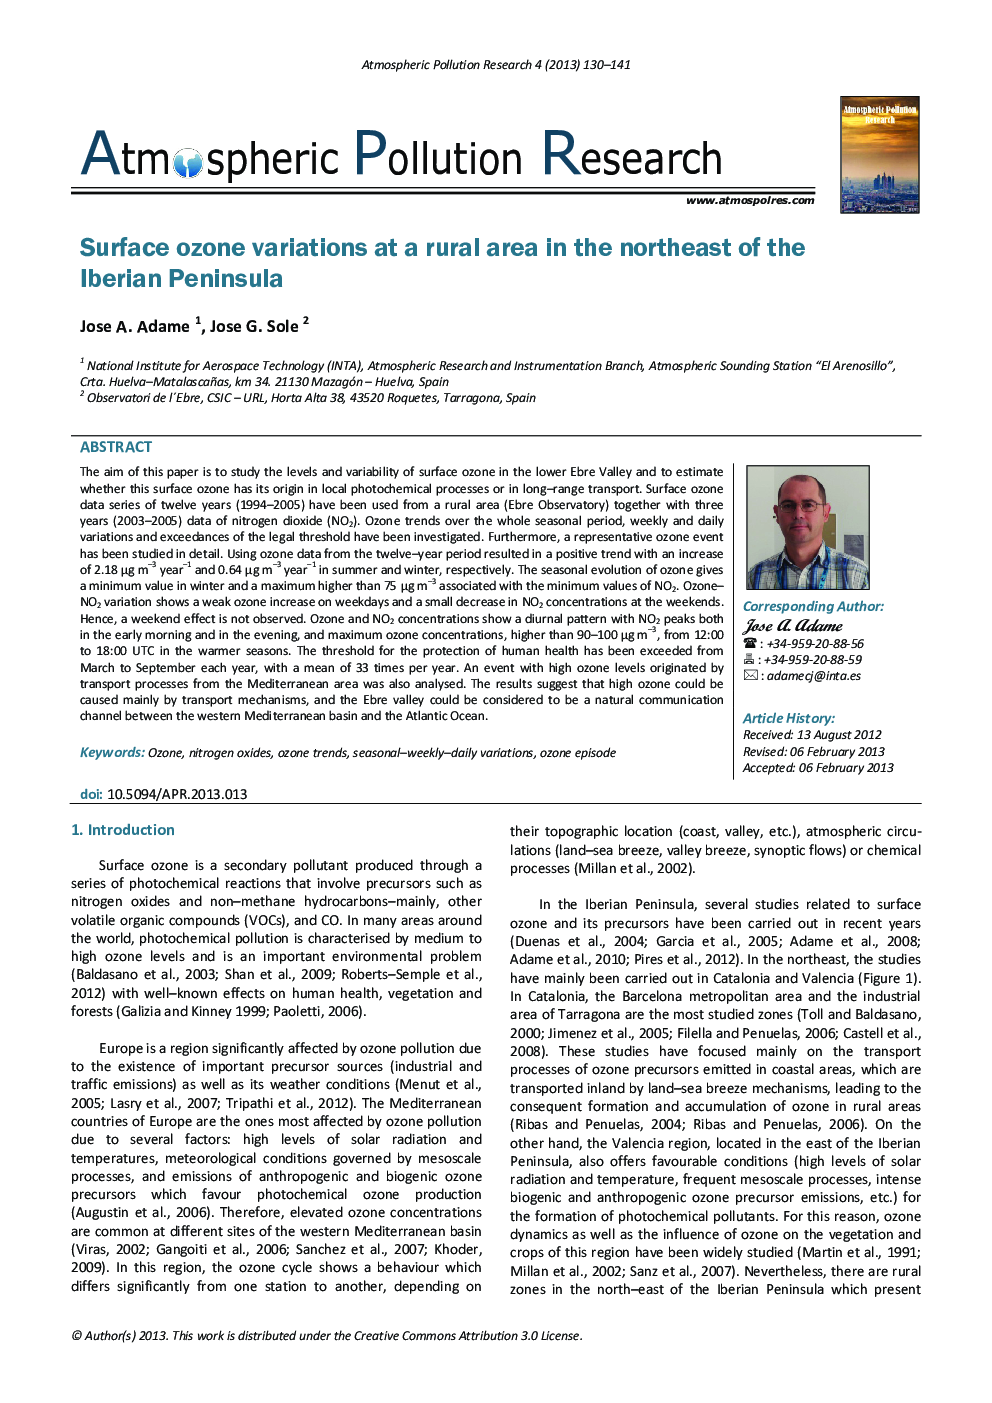 Surface ozone variations at a rural area in the northeast of the Iberian Peninsula